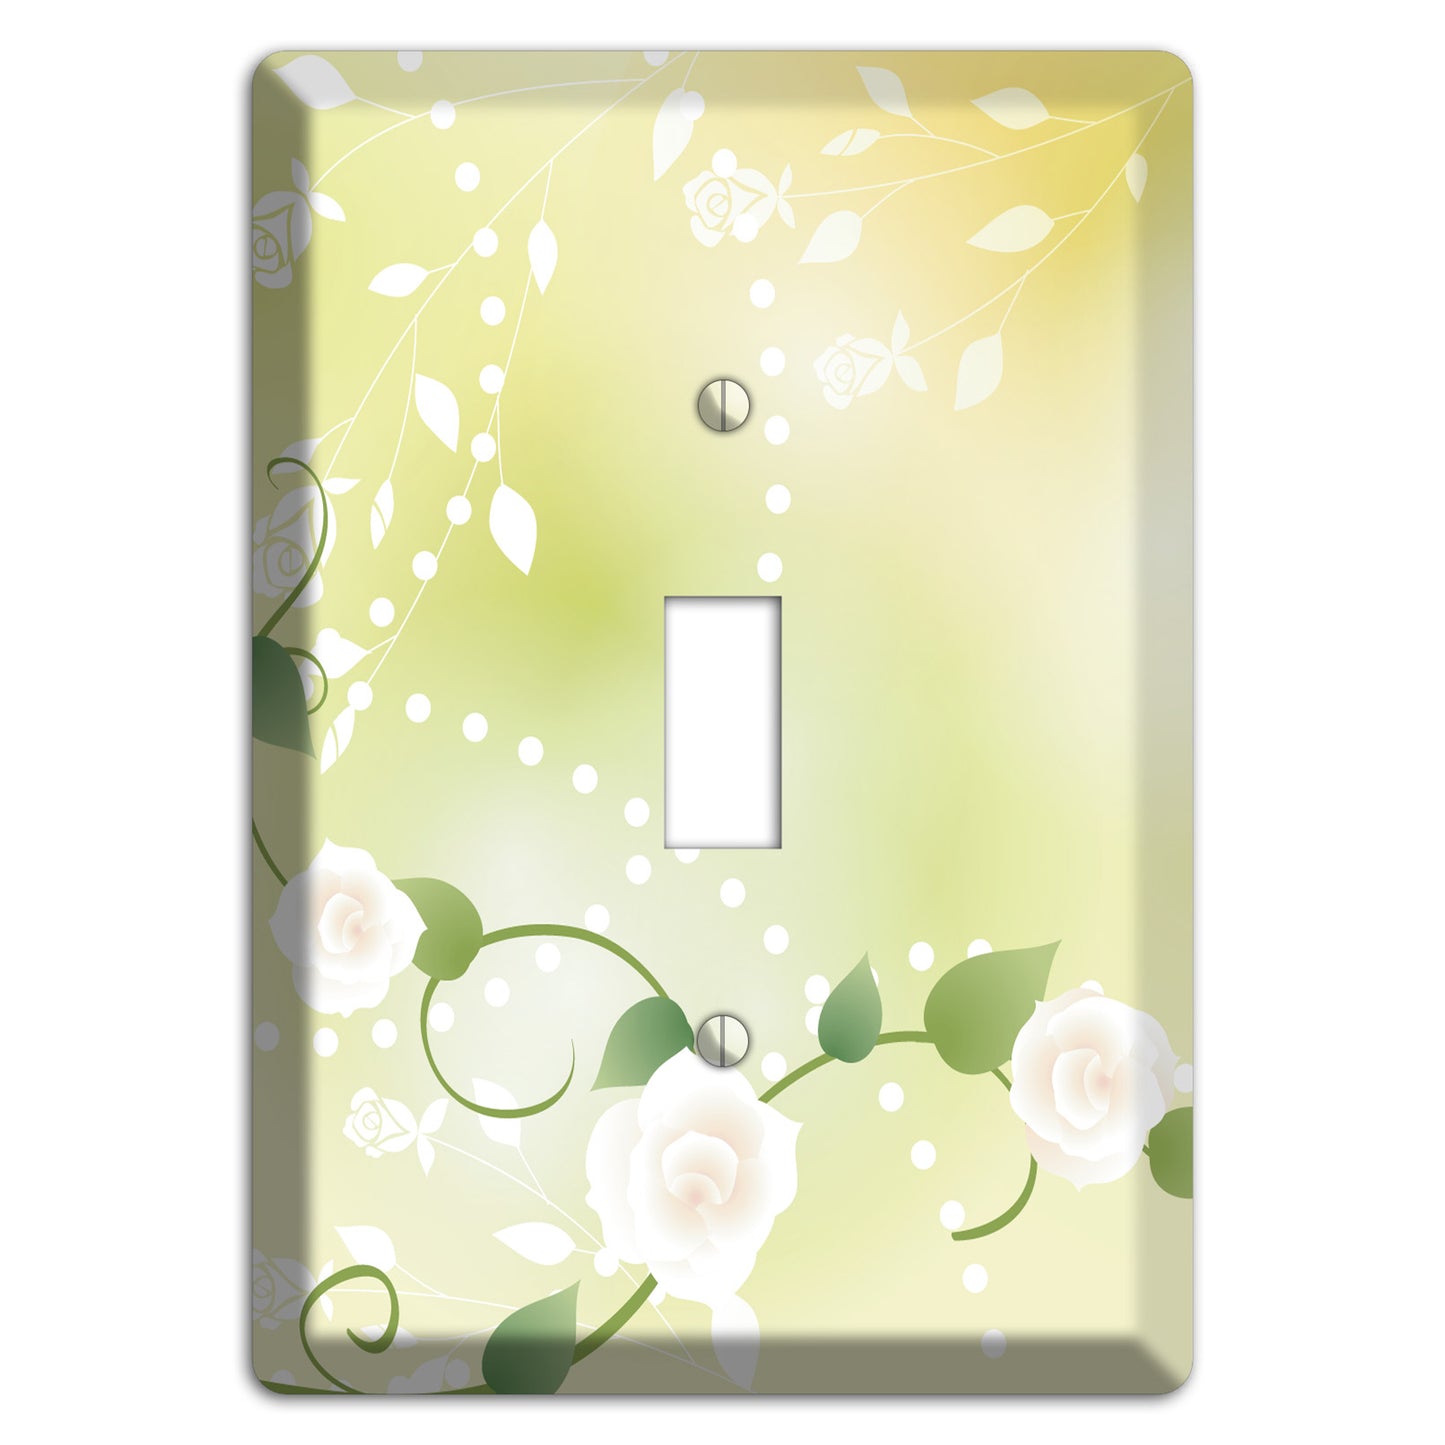 Green Delicate Flowers Cover Plates